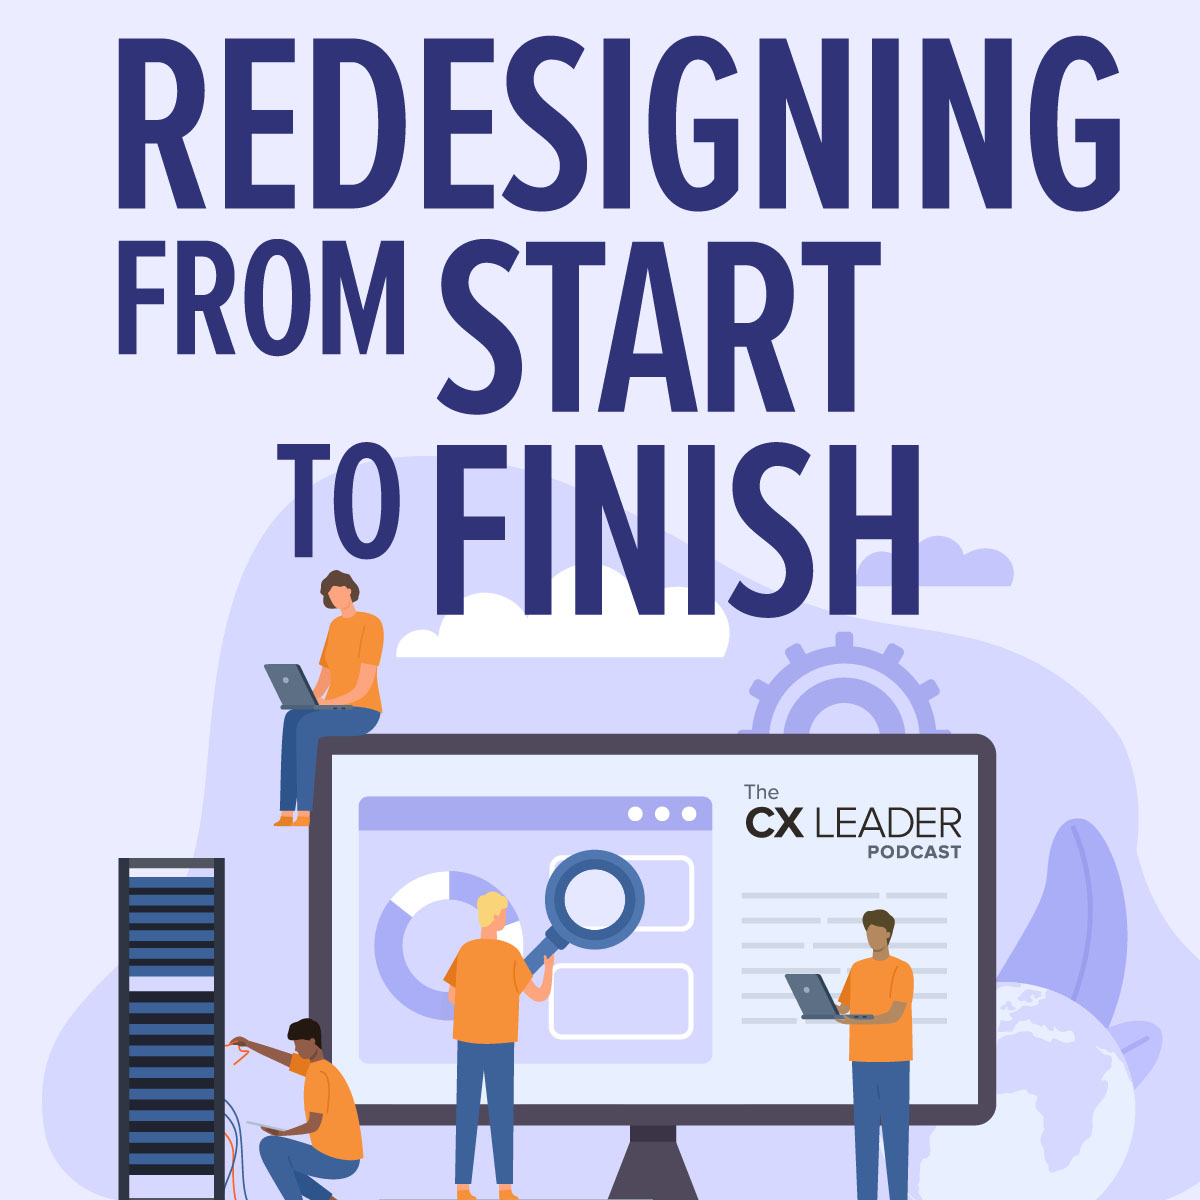 Redesigning from Start to Finish